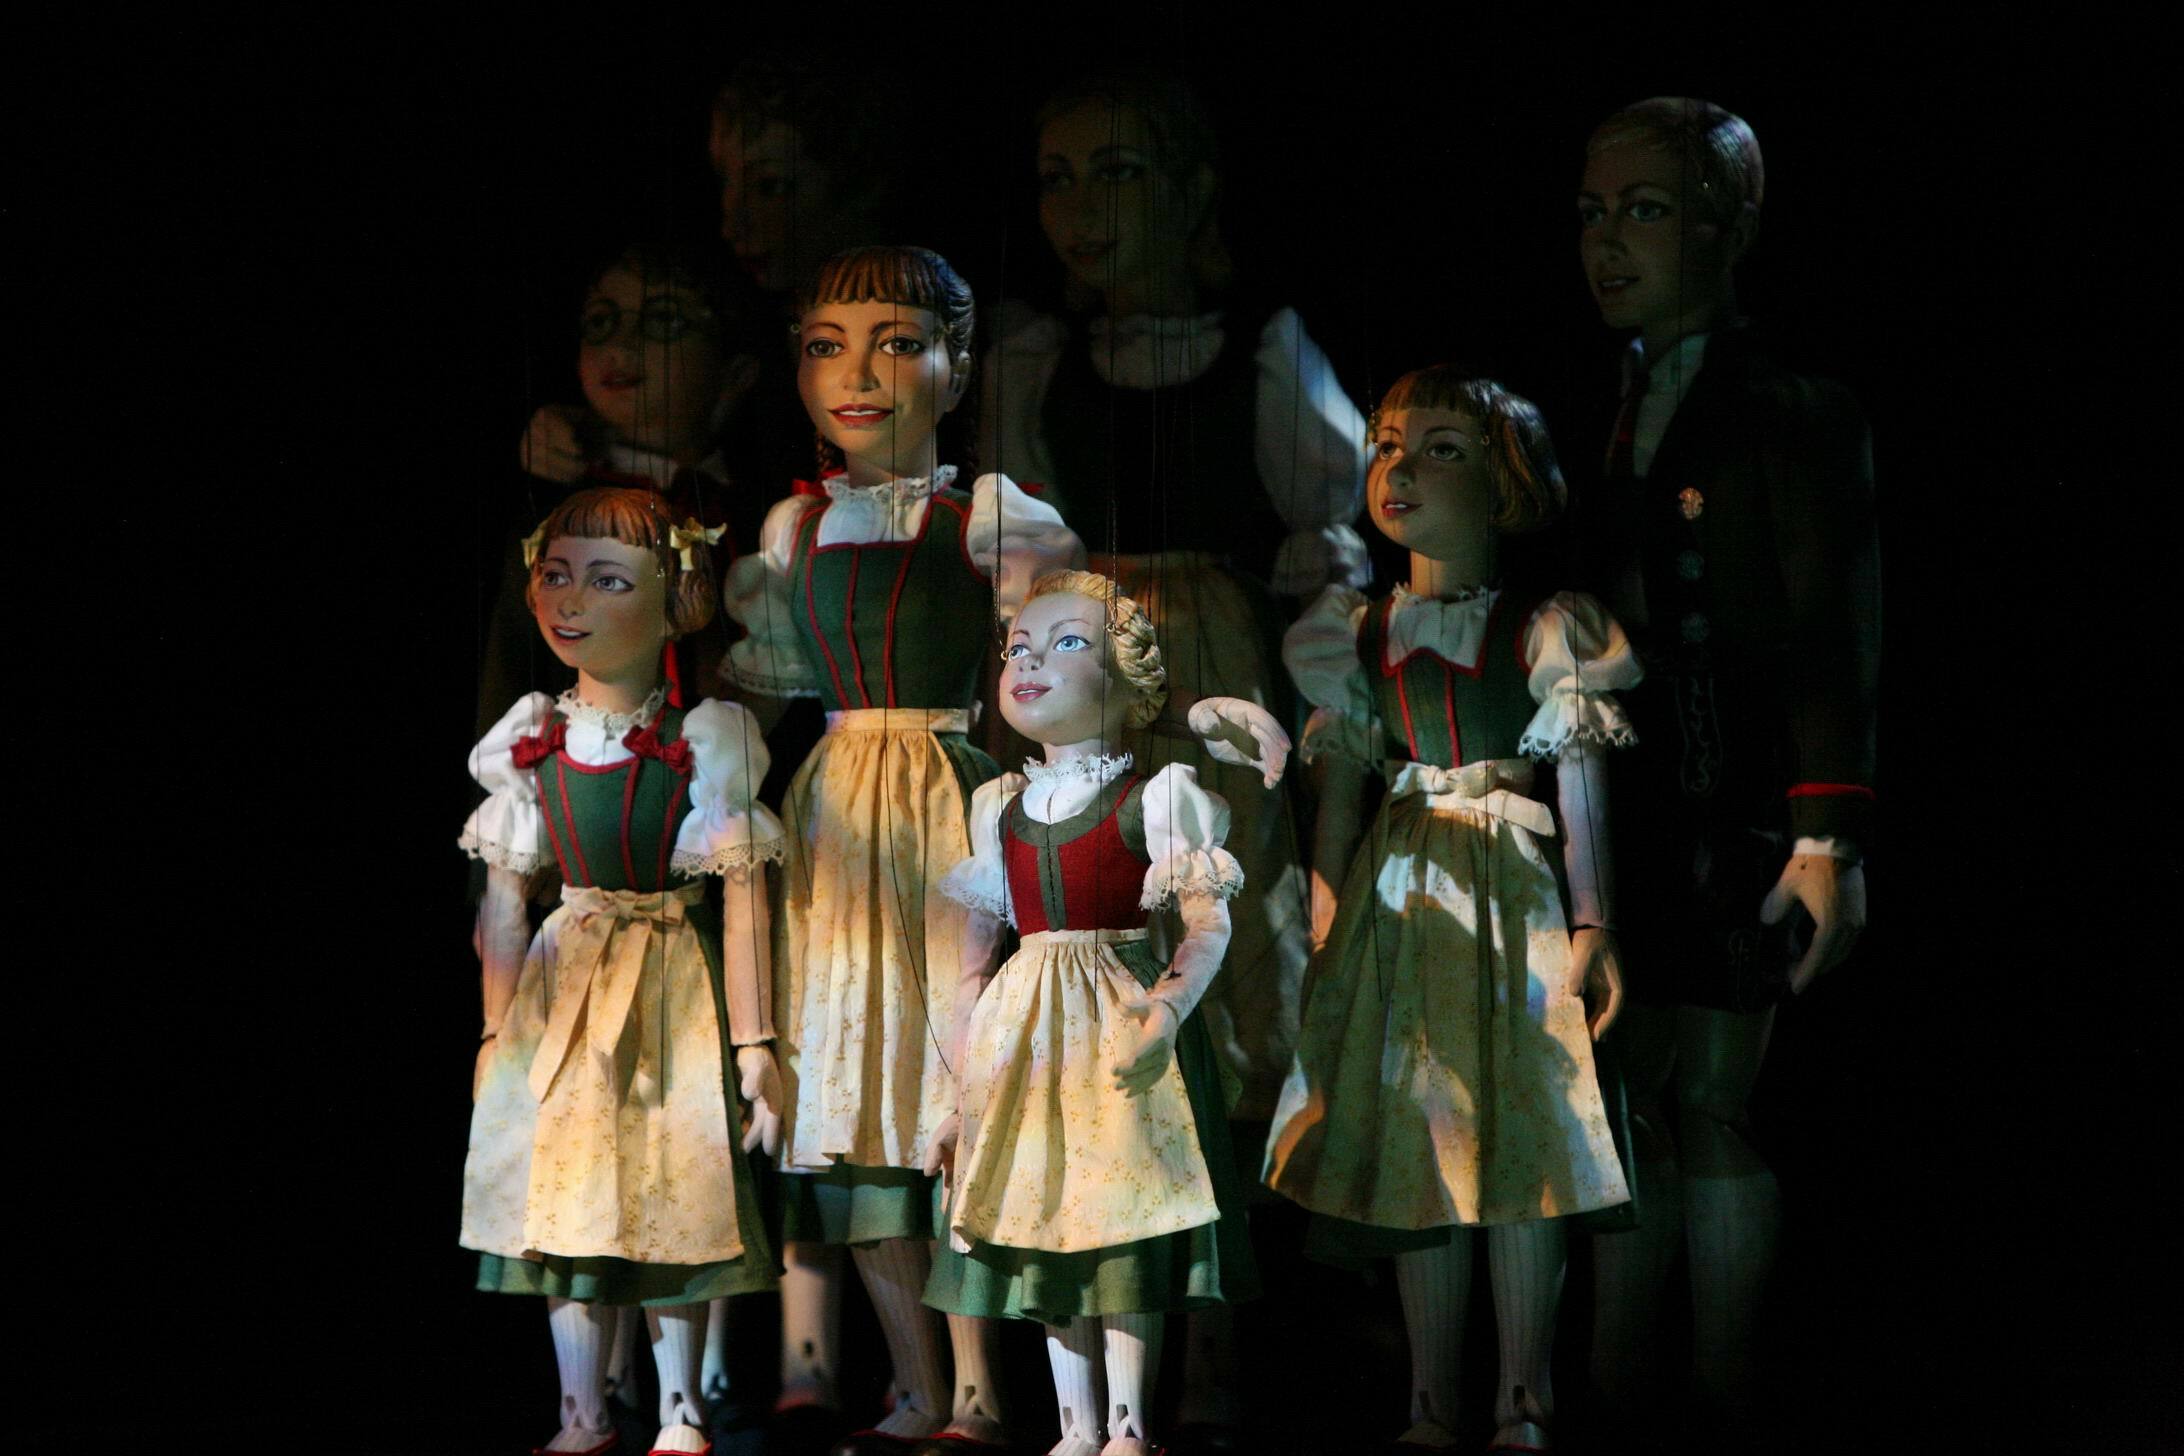 Puppets from "The Sound of Music"